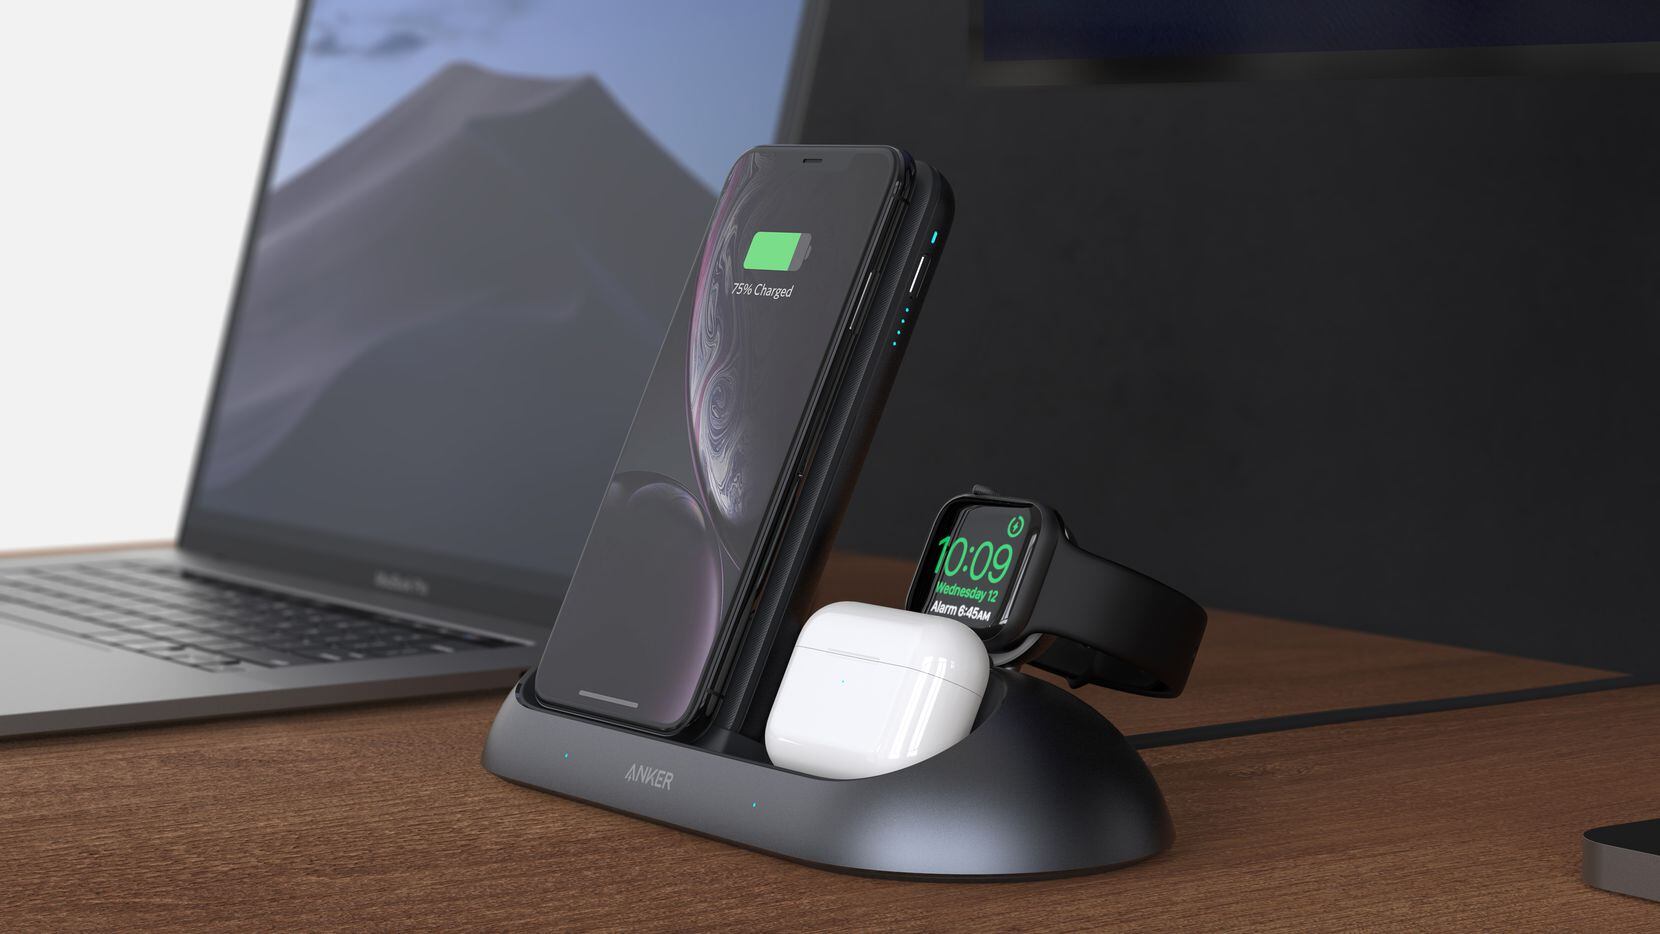 The Anker PowerWave Go 3-in-1 Charging Stand